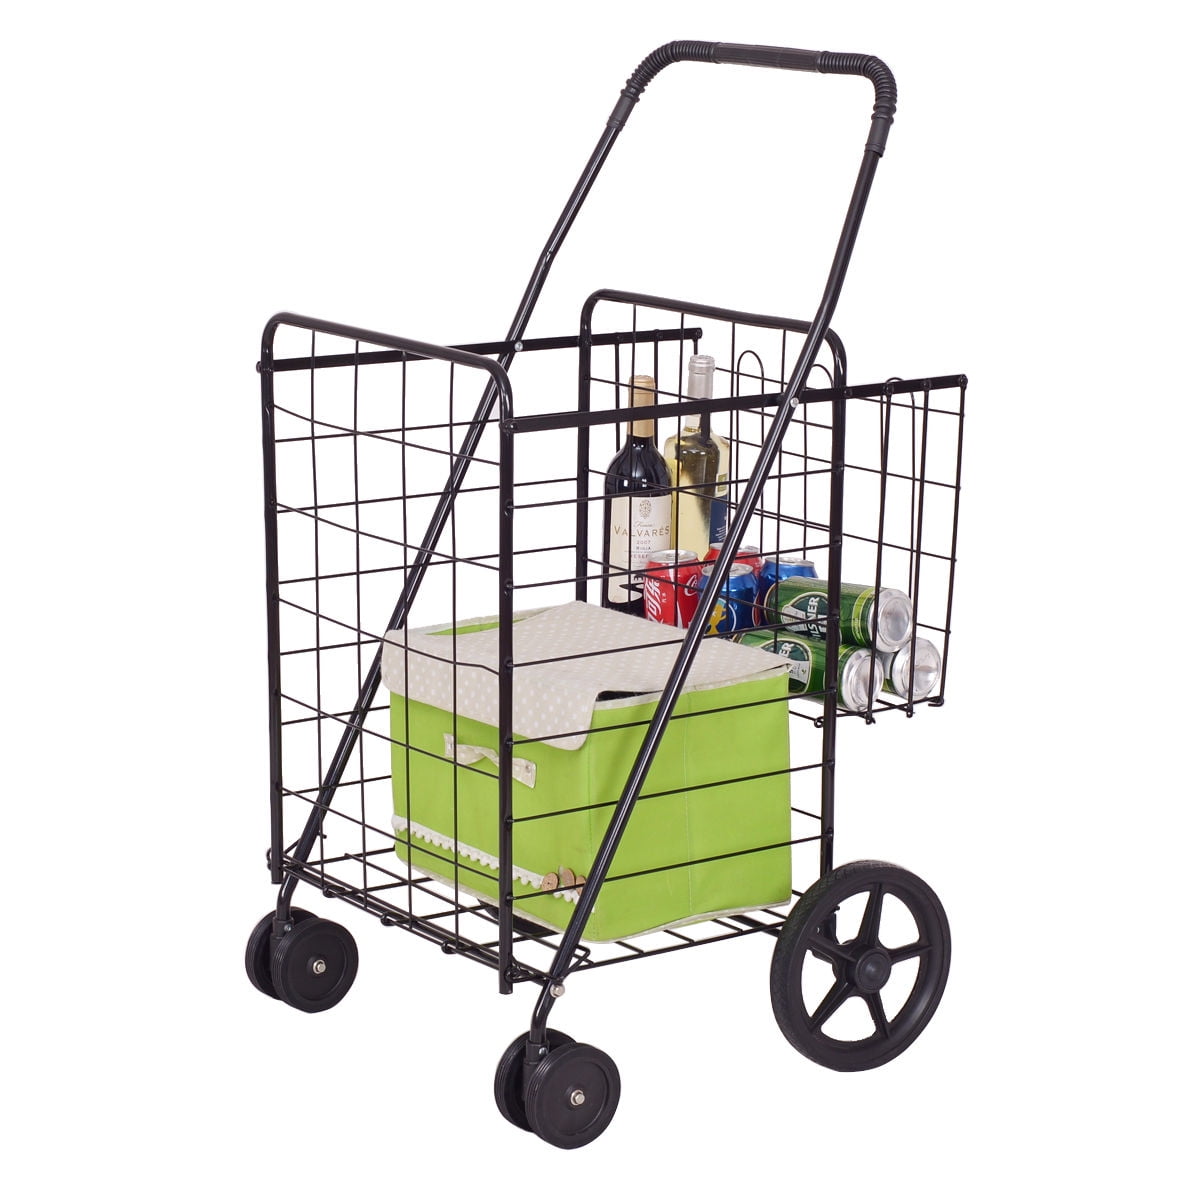 ChenDz-S Loading cart small cart shopping cart climbing building folding portable trolley car trolley old cart domestic trailer Color : Brown 